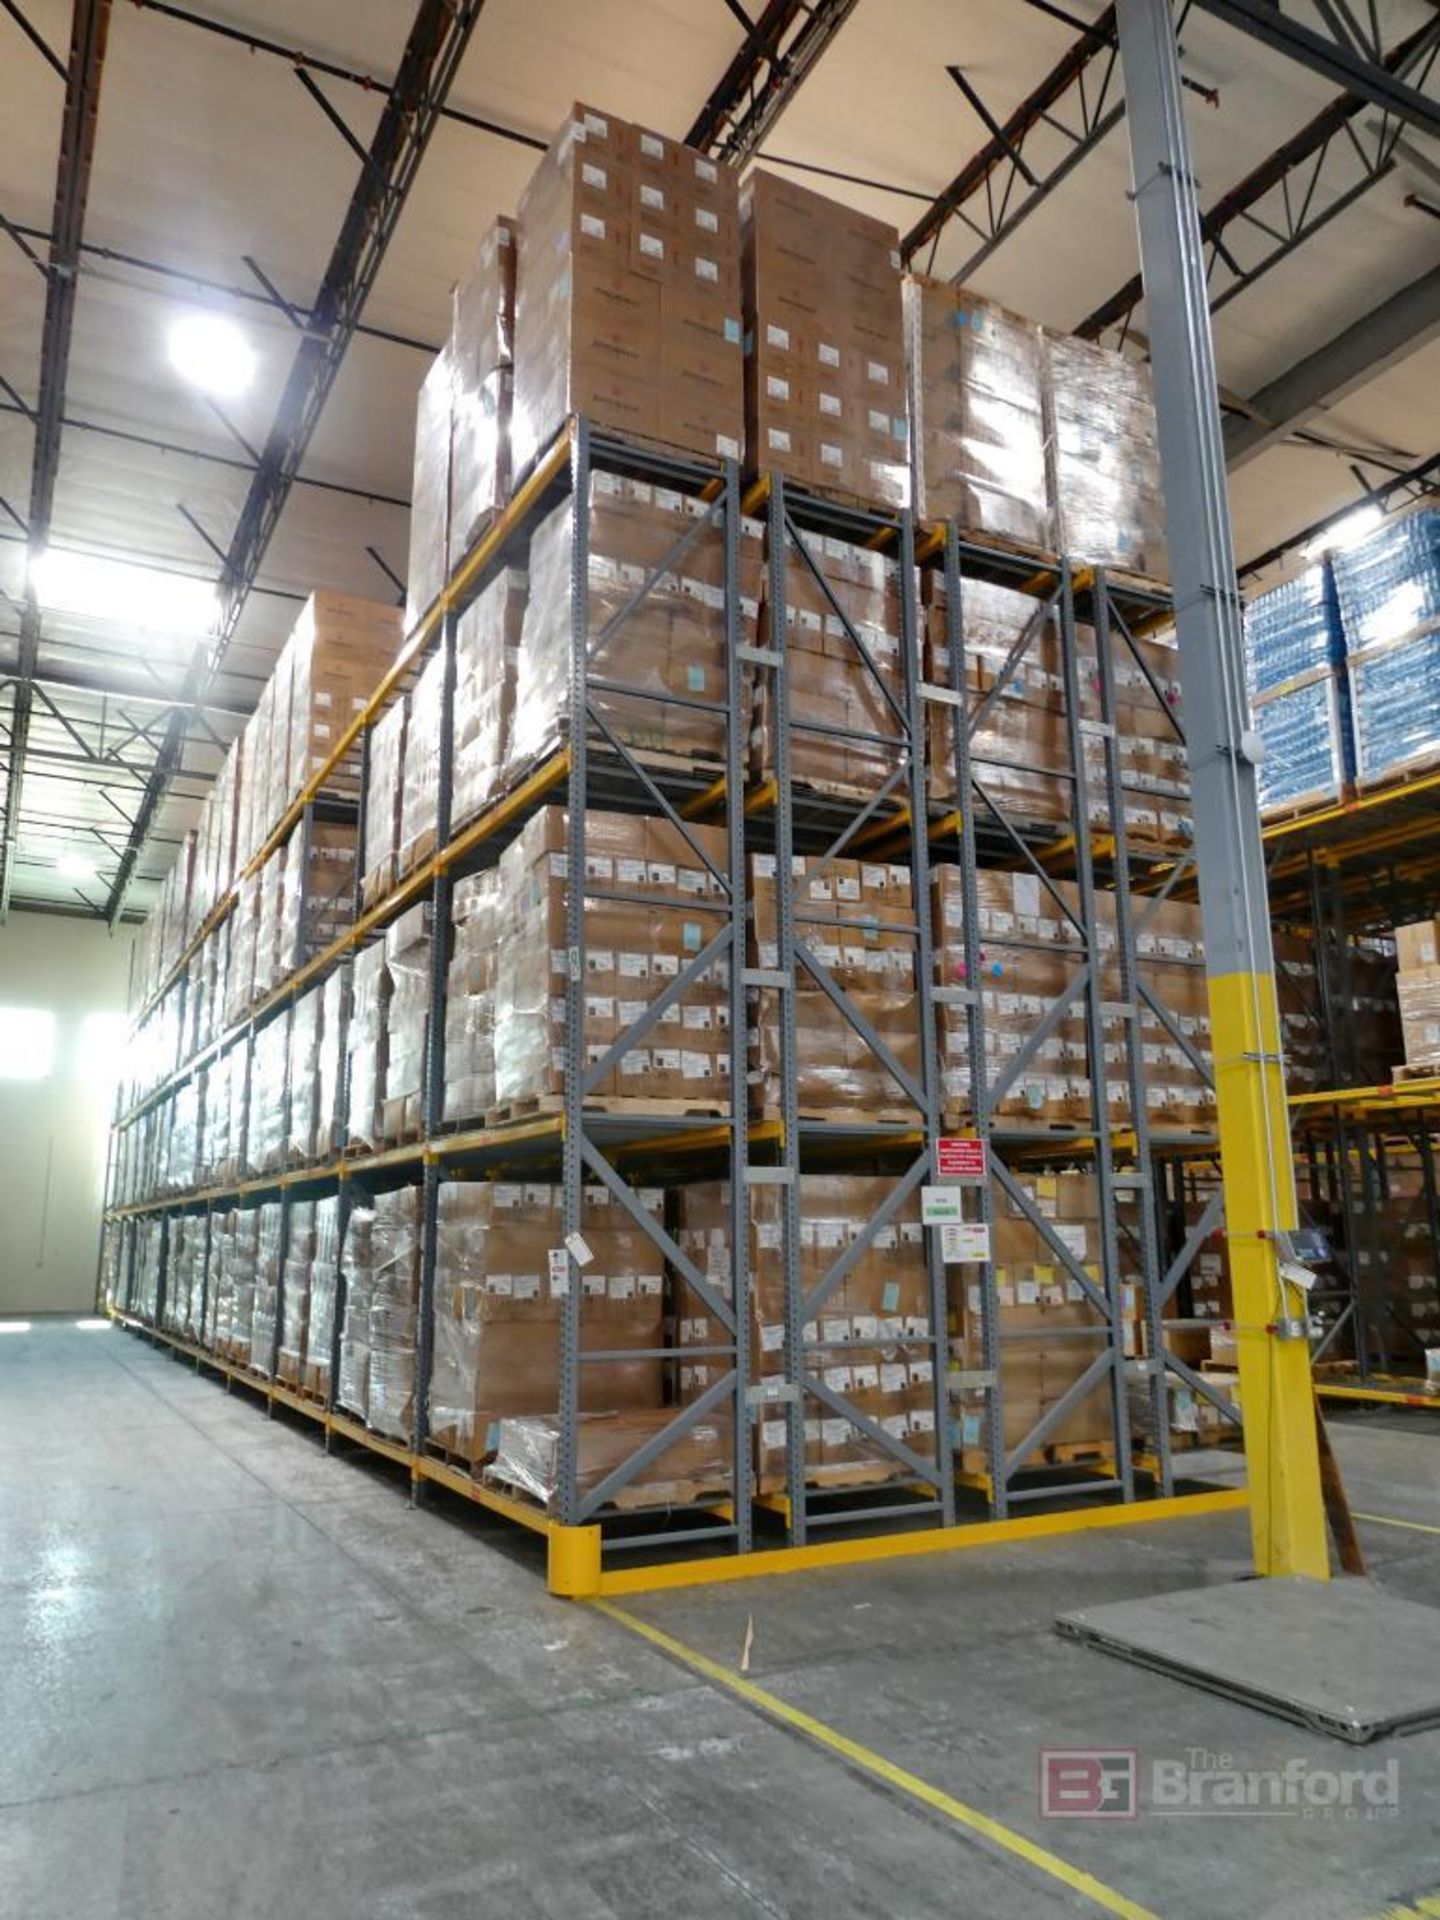 (48) Sections of Medium Duty Pallet Racking